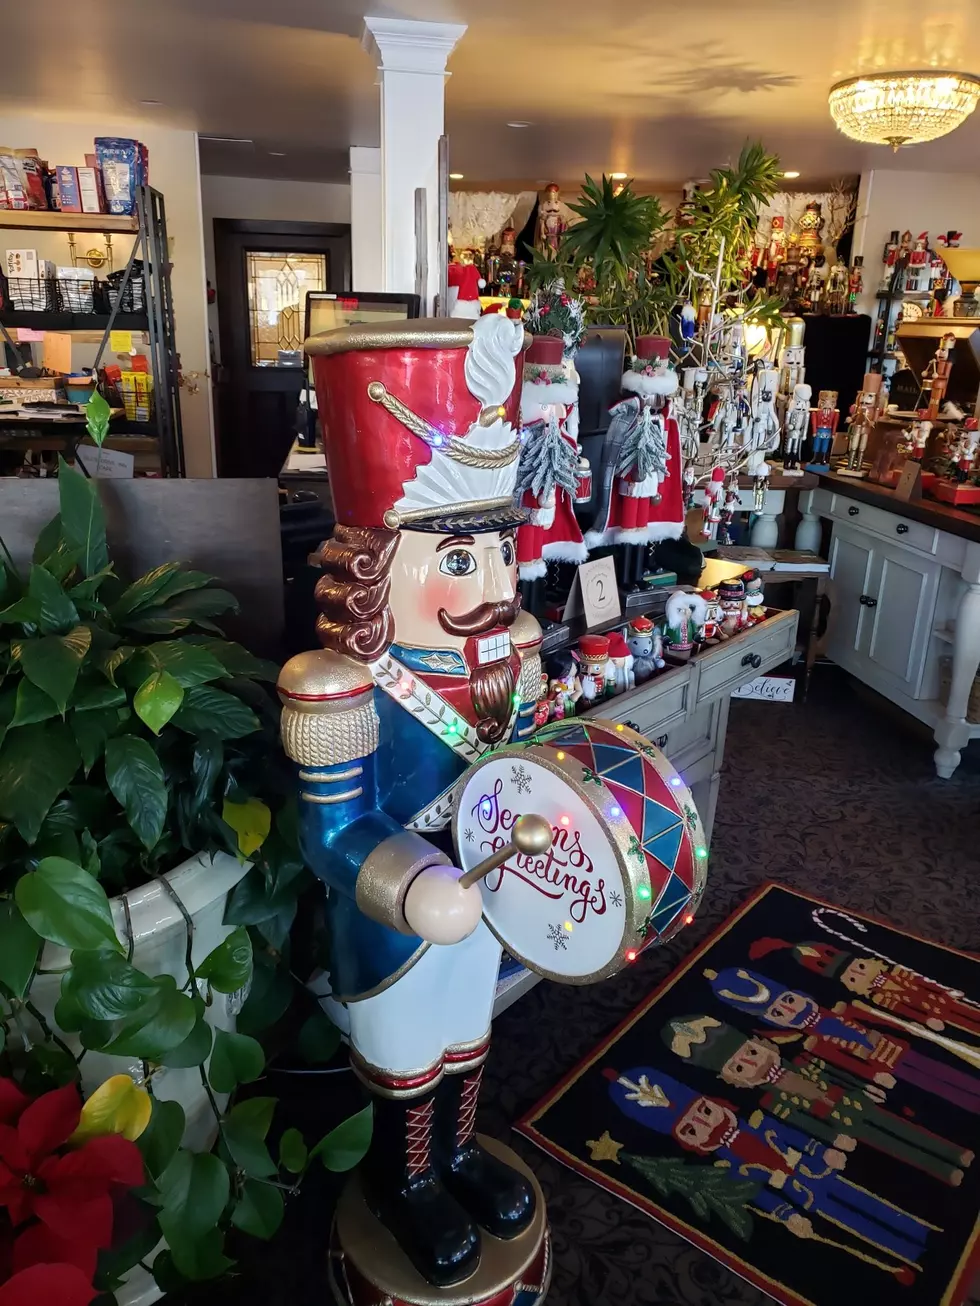 Bozeman Business Shares Spectacular One Of A Kind Holiday Display